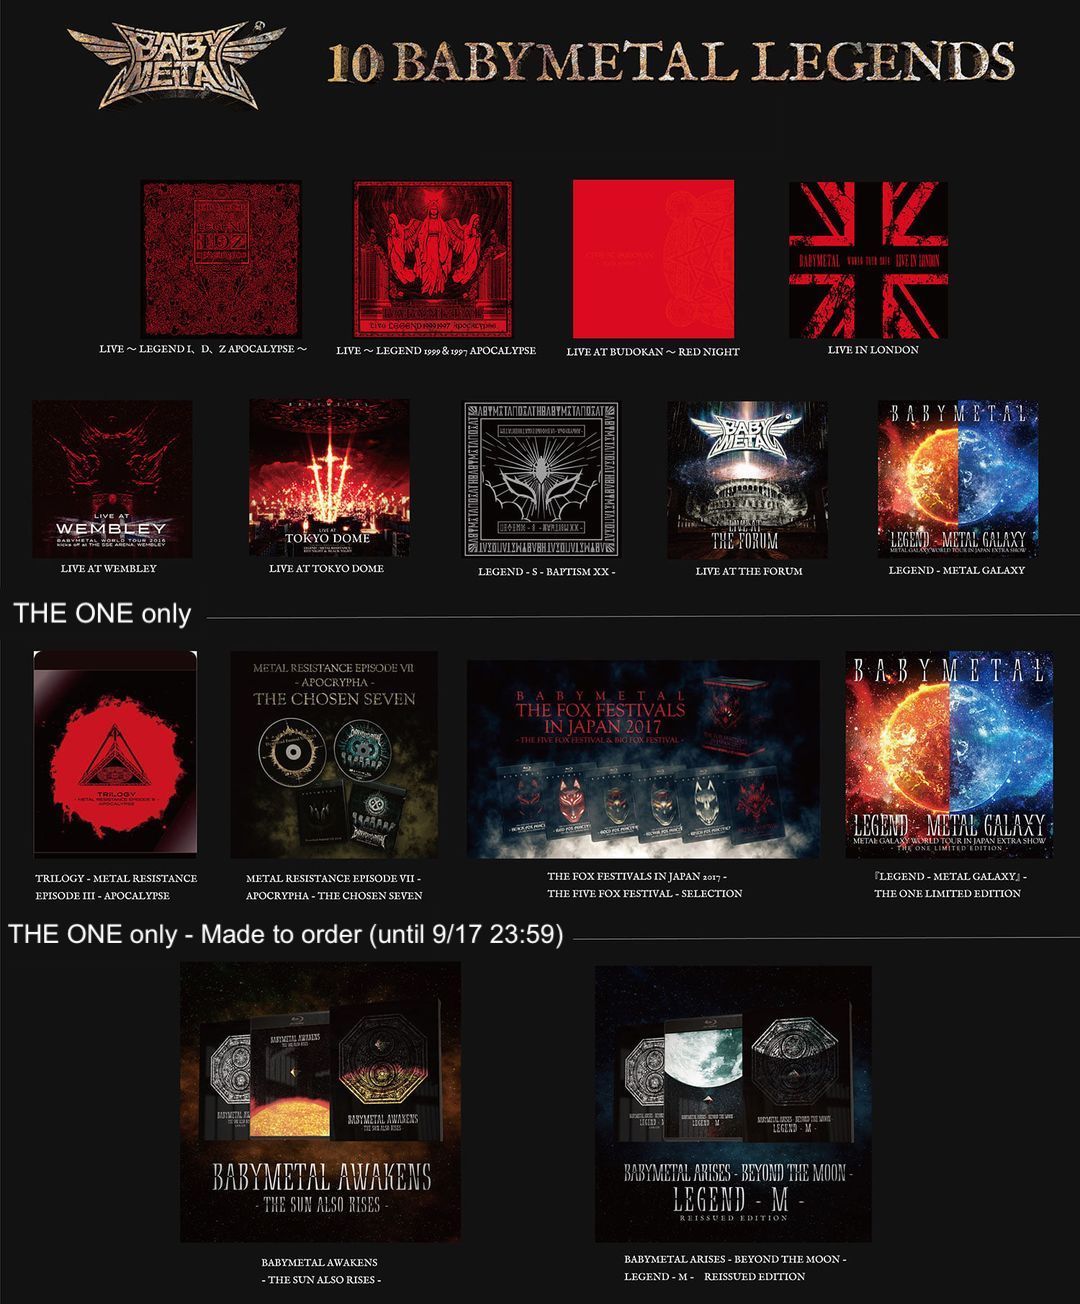 BABYMETAL Announces The “10 BABYMETAL LEGENDS” Will Be Sold On 